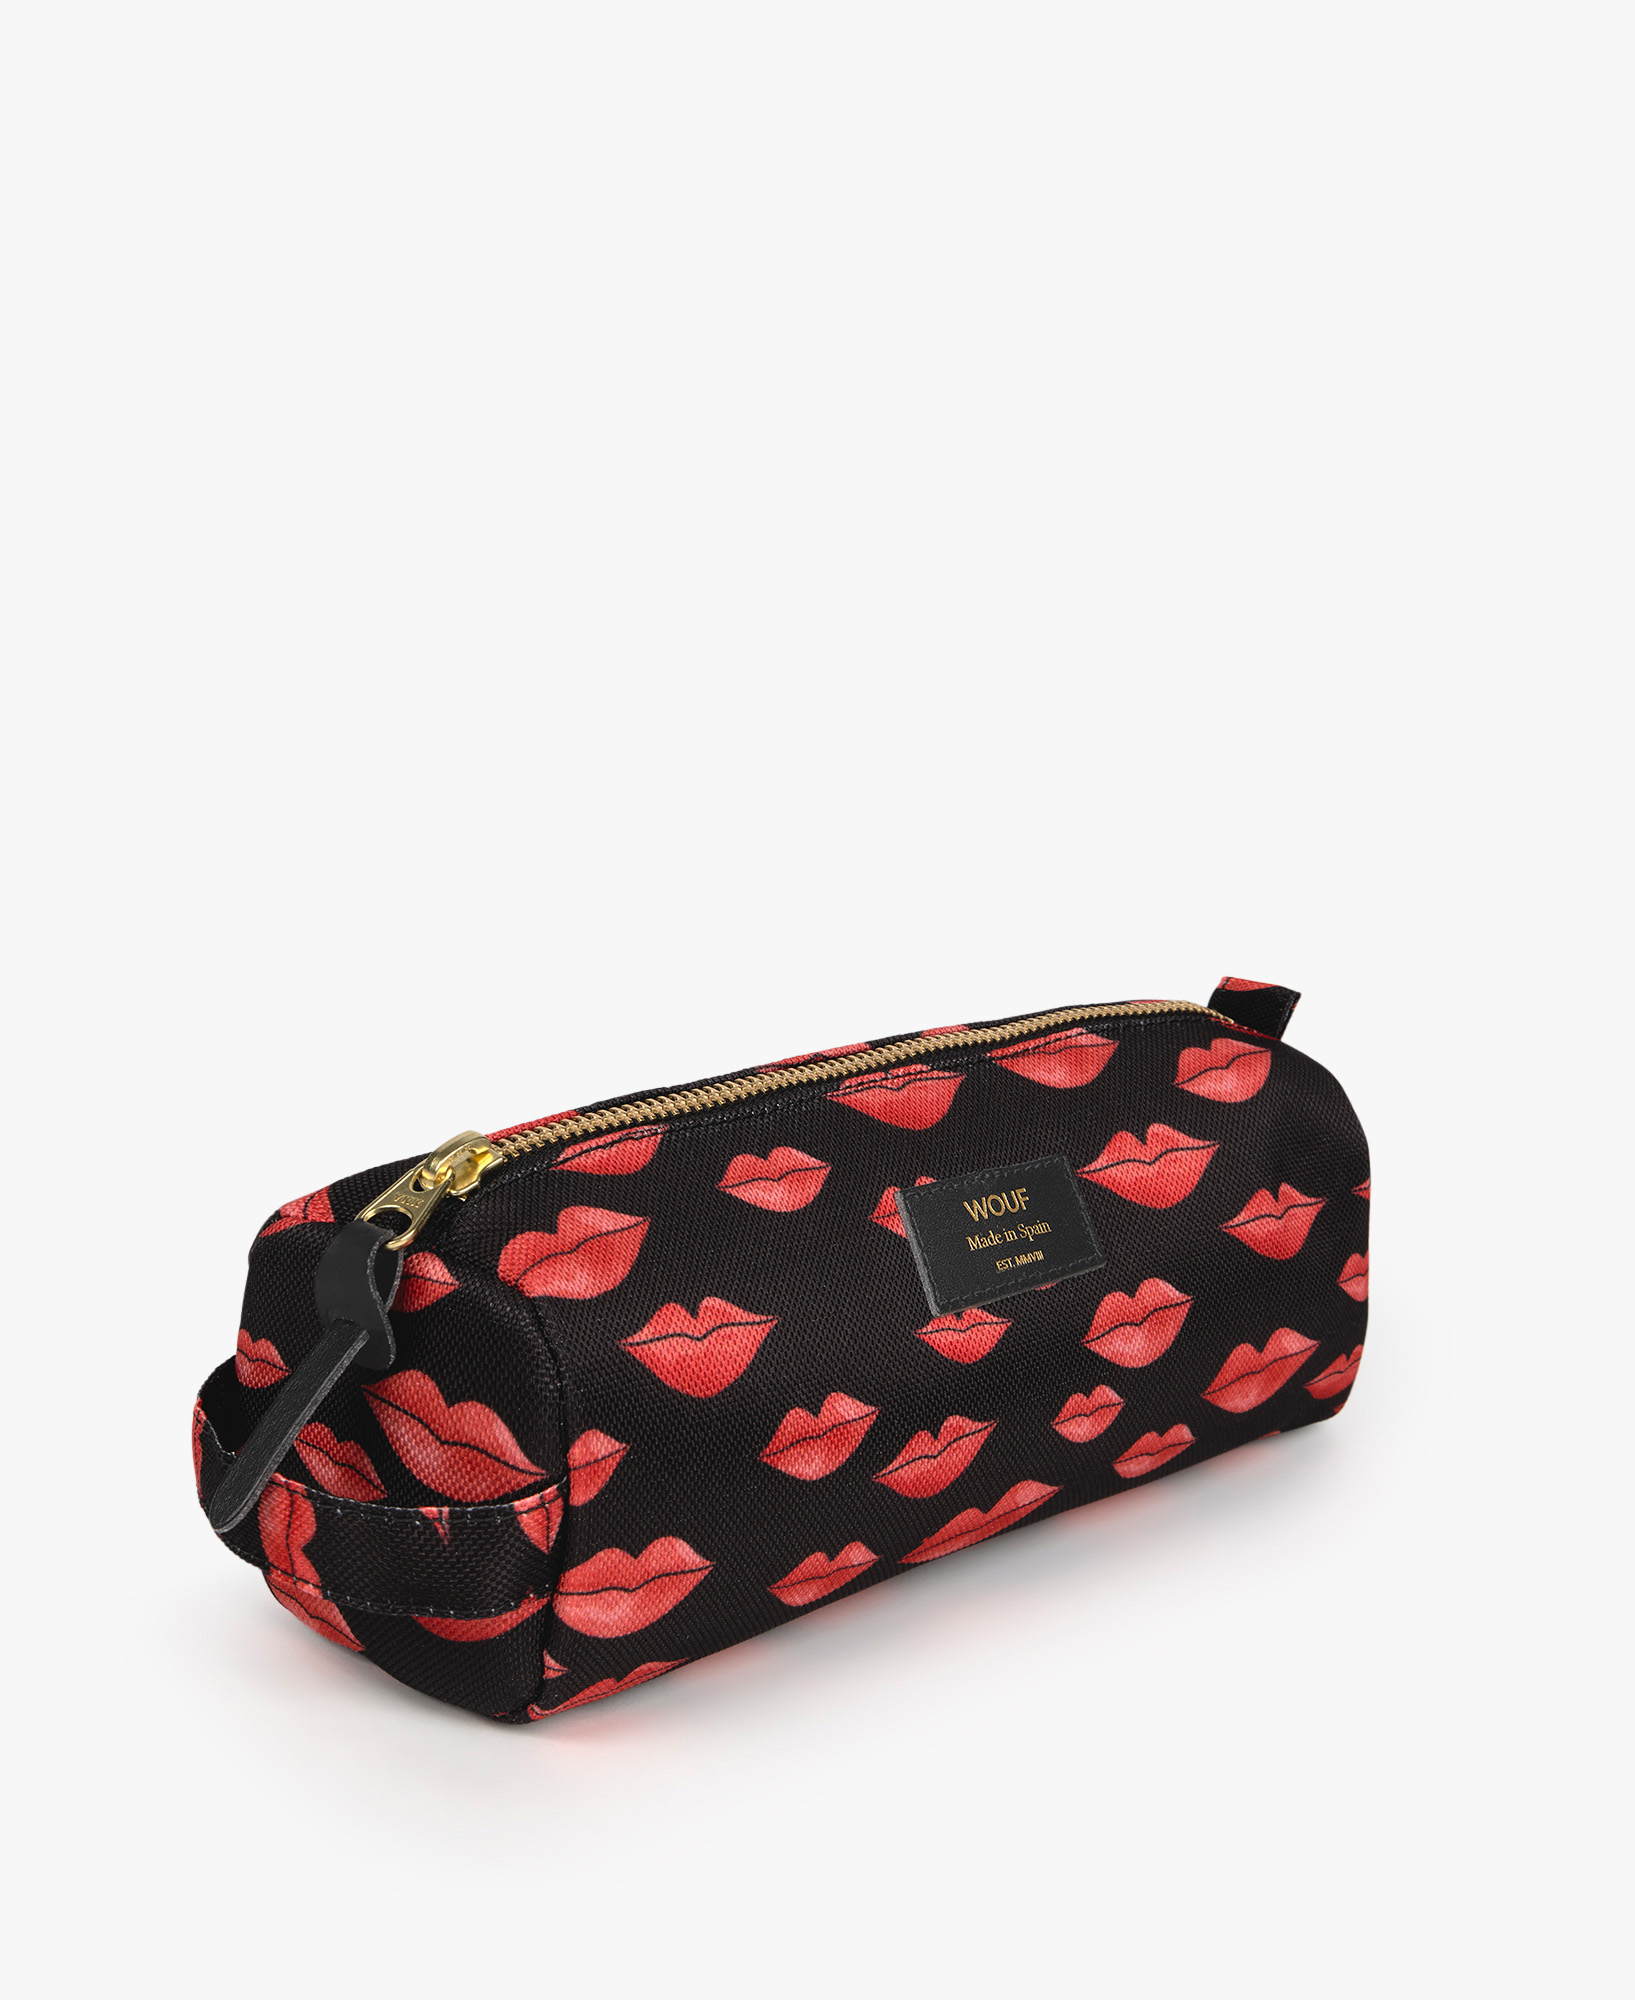 WOUF-Pencil-Case-Beso-Display